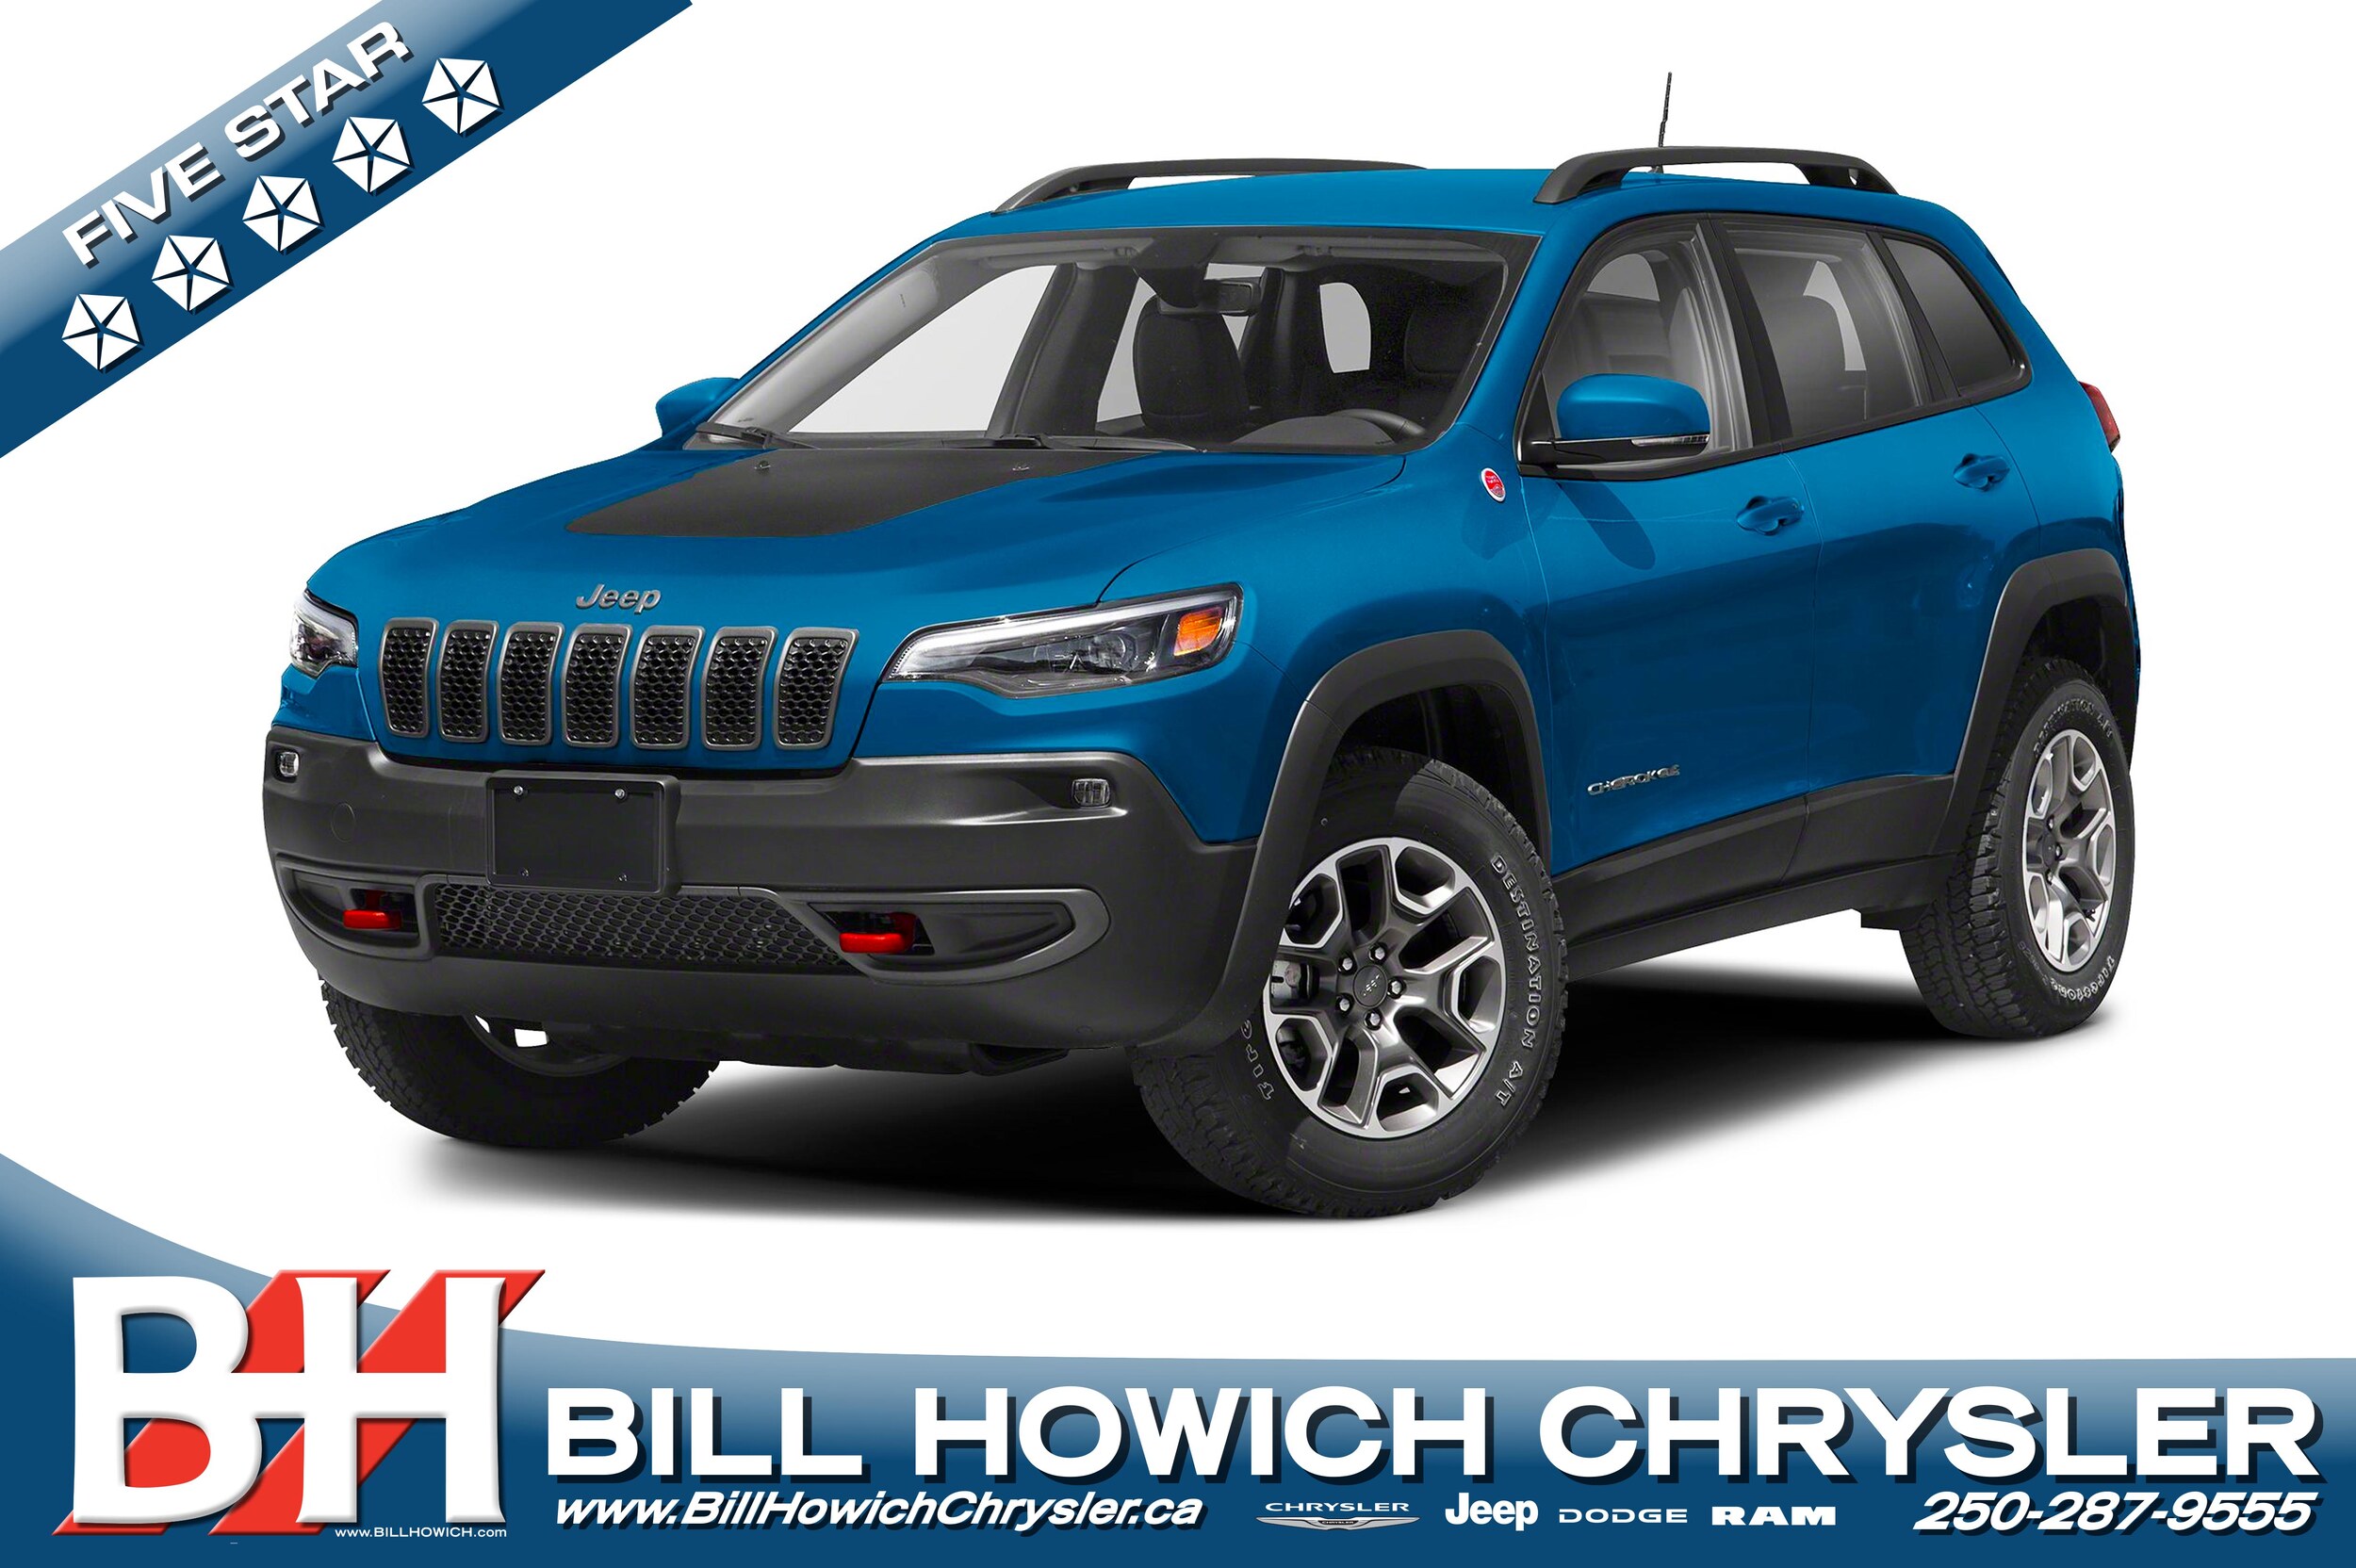 New 21 Jeep Cherokee Trailhawk Elite For Sale Campbell River